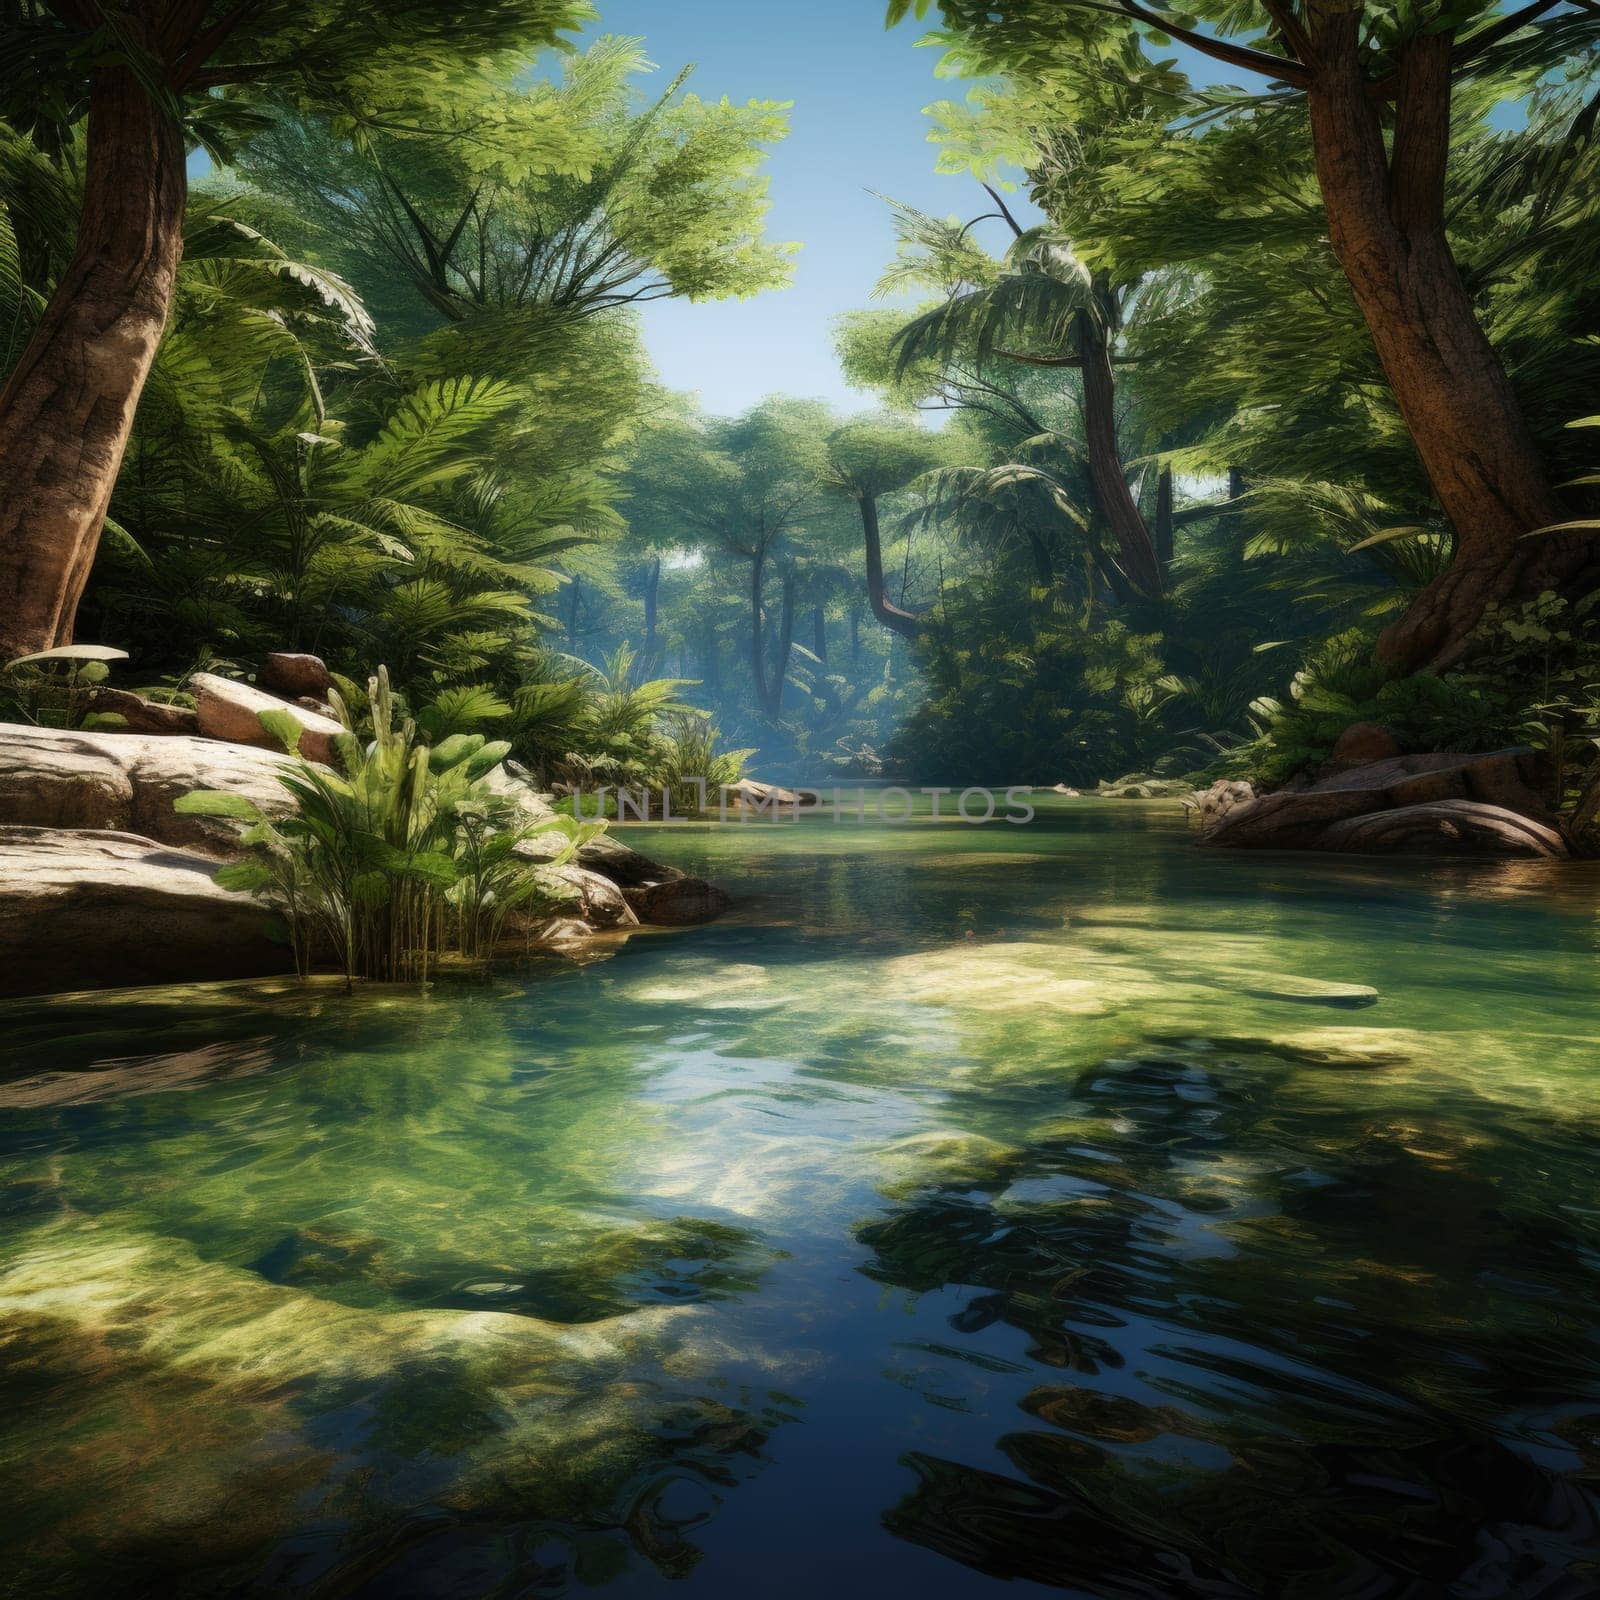 A river flows through the lush green forest, creating a shimmering and captivating scene.